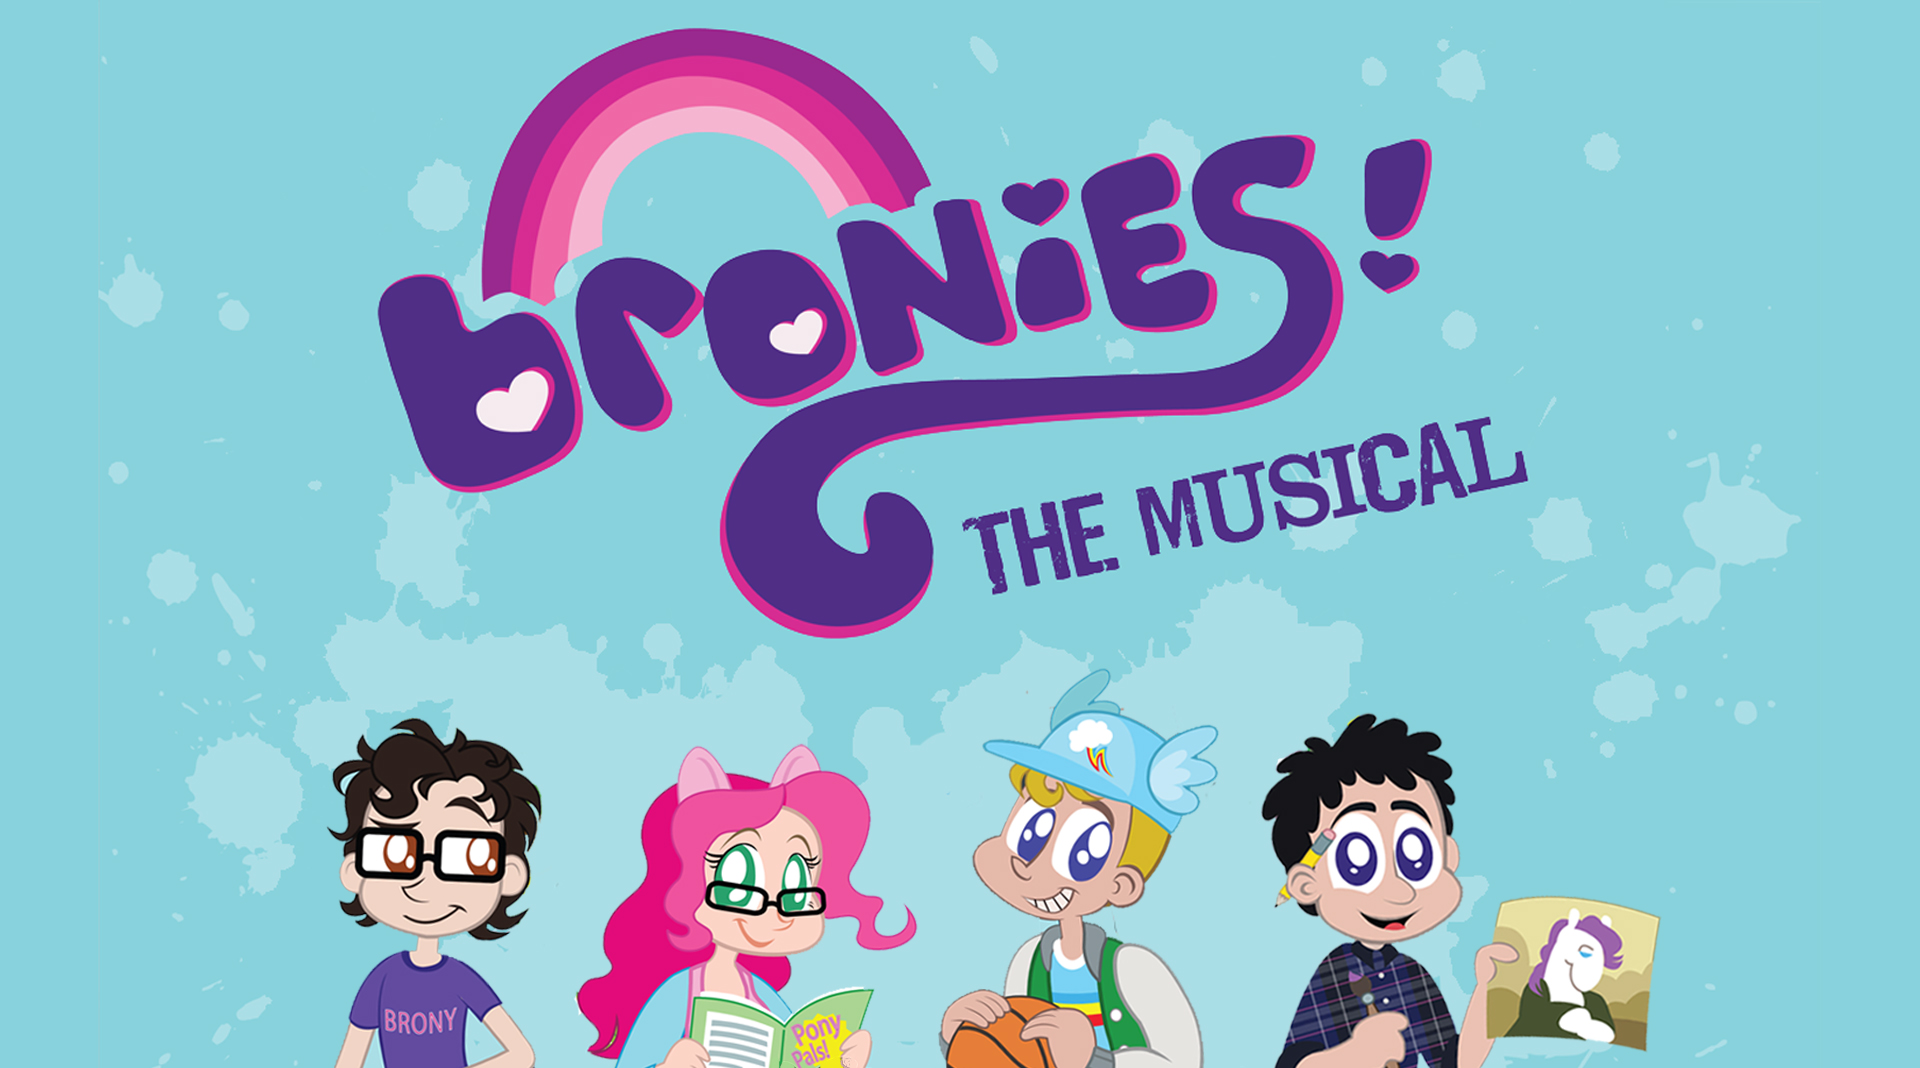 Bronies: The Musical kicks off Kickstarter for cast album and Los Angeles production